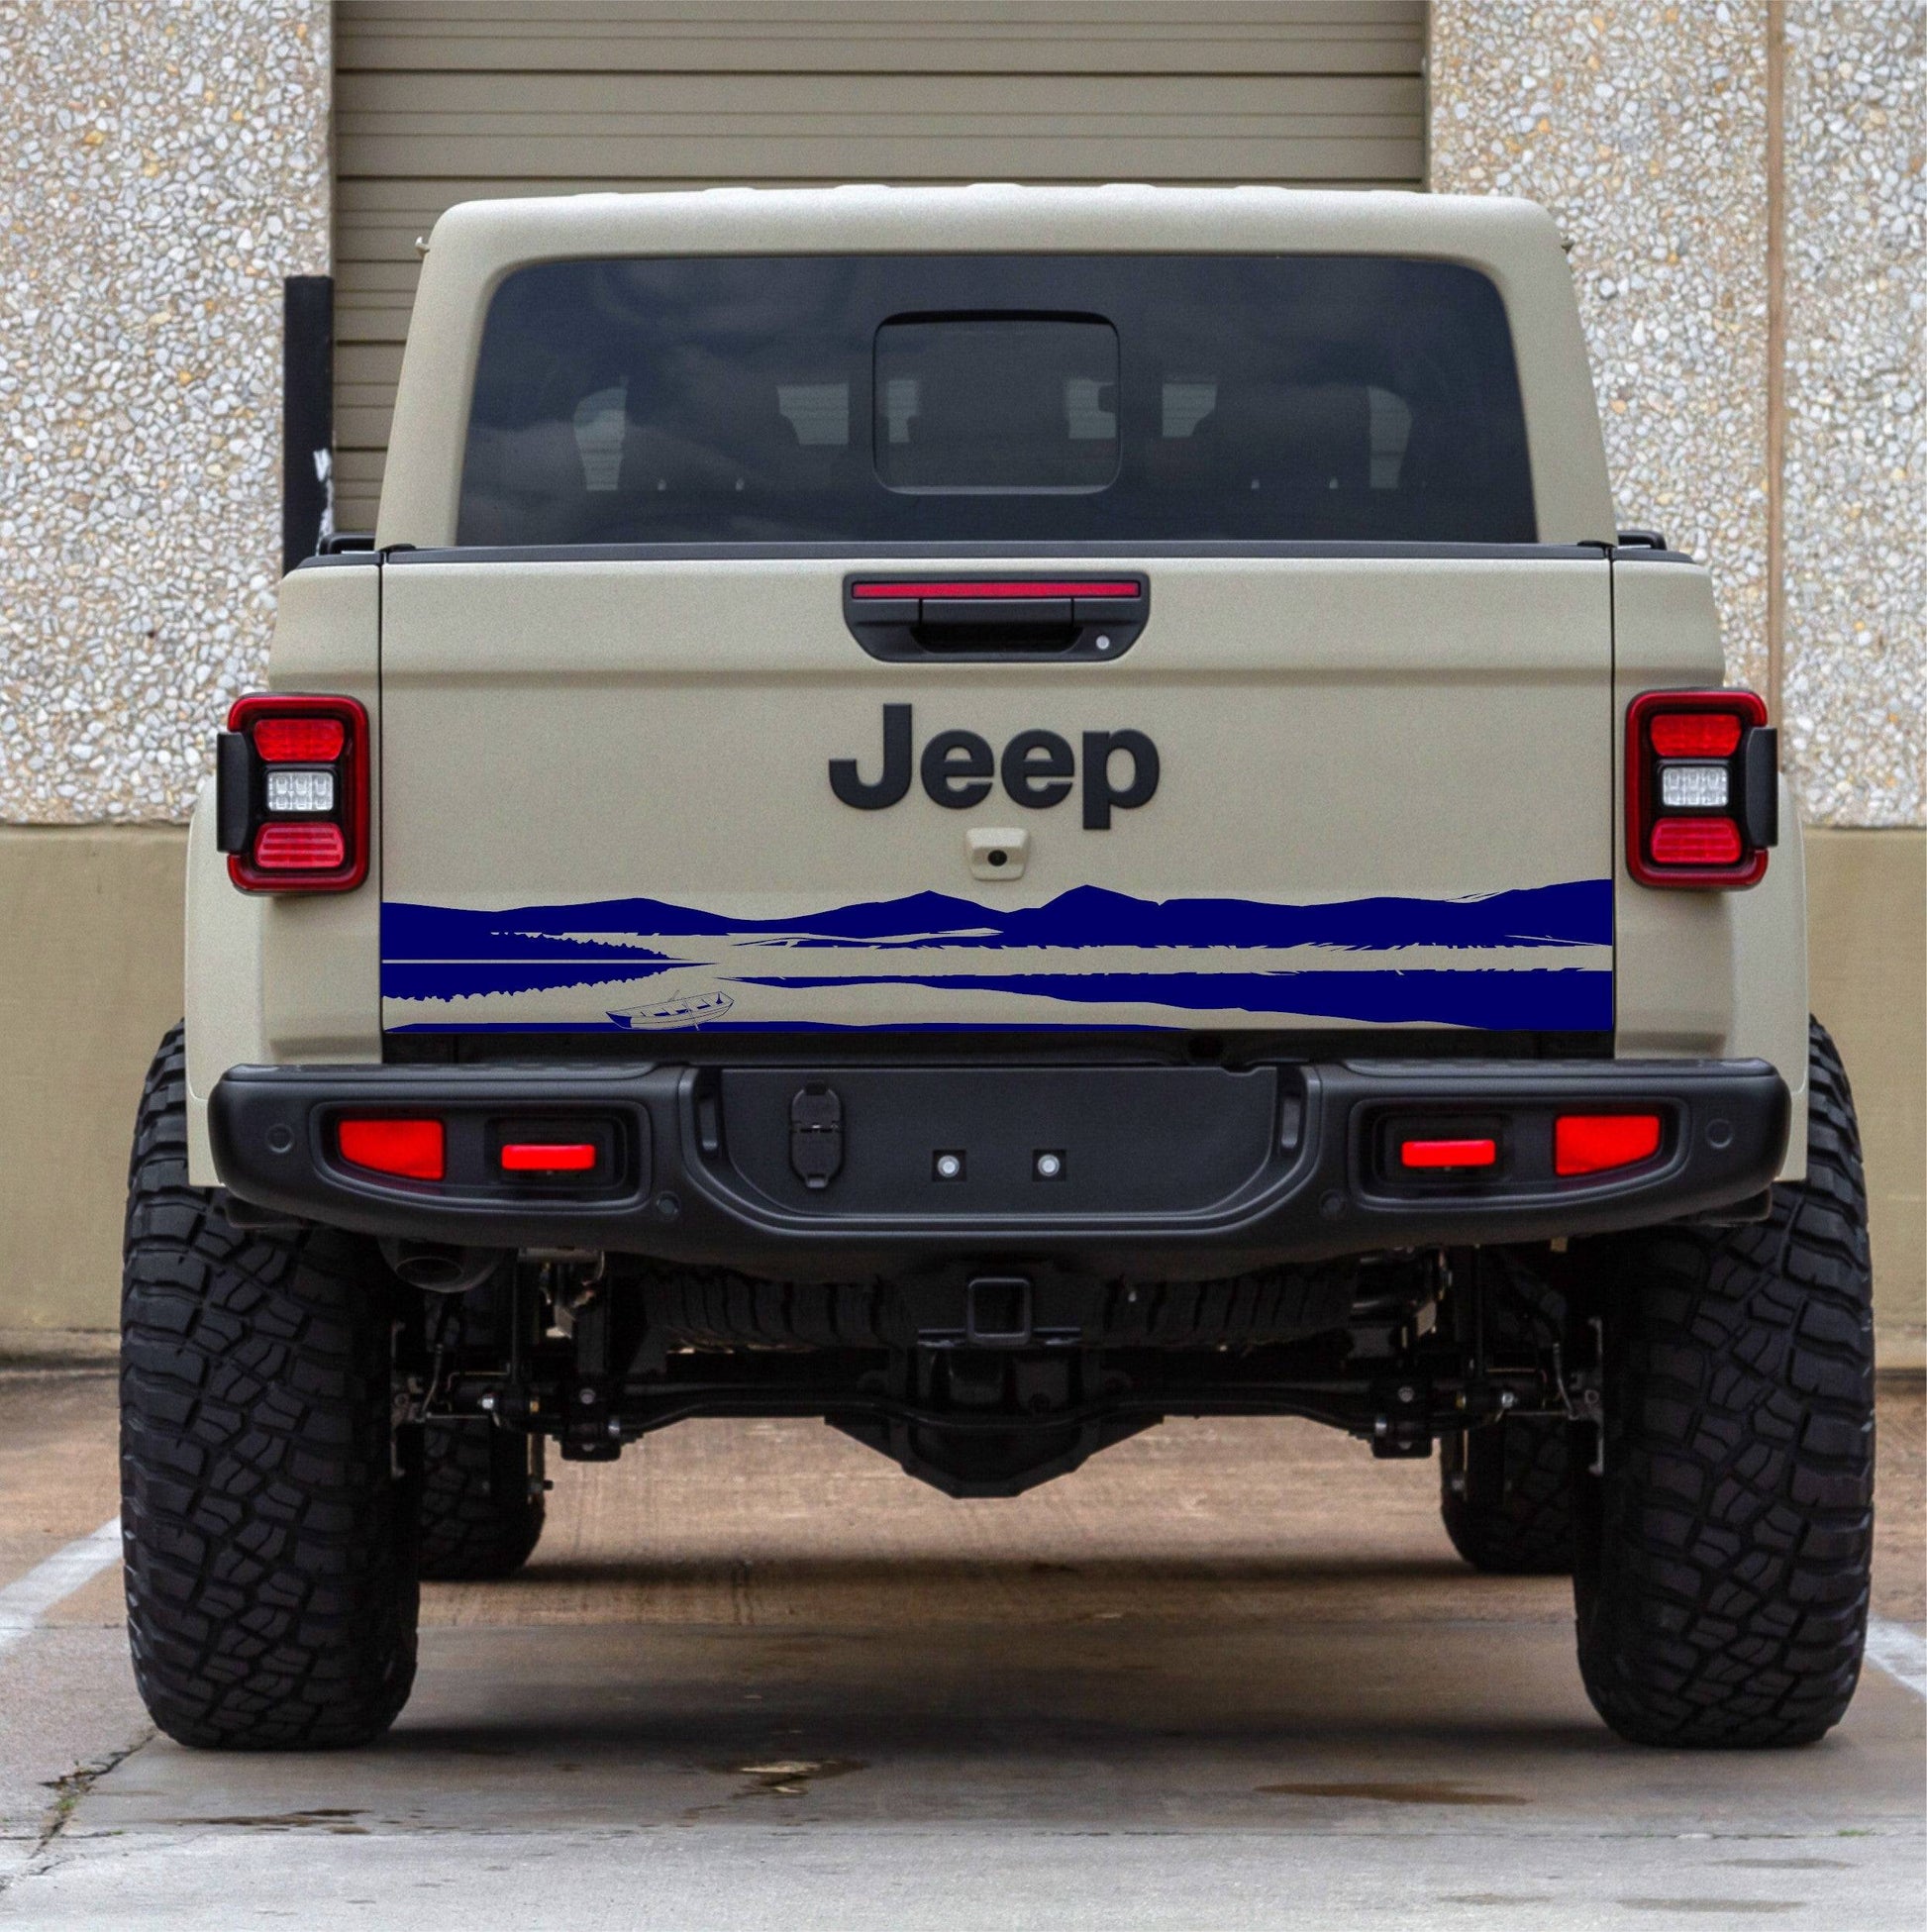 Mountain Lake Silhouette Vinyl Decal for Jeep Gladiator's Tailgate